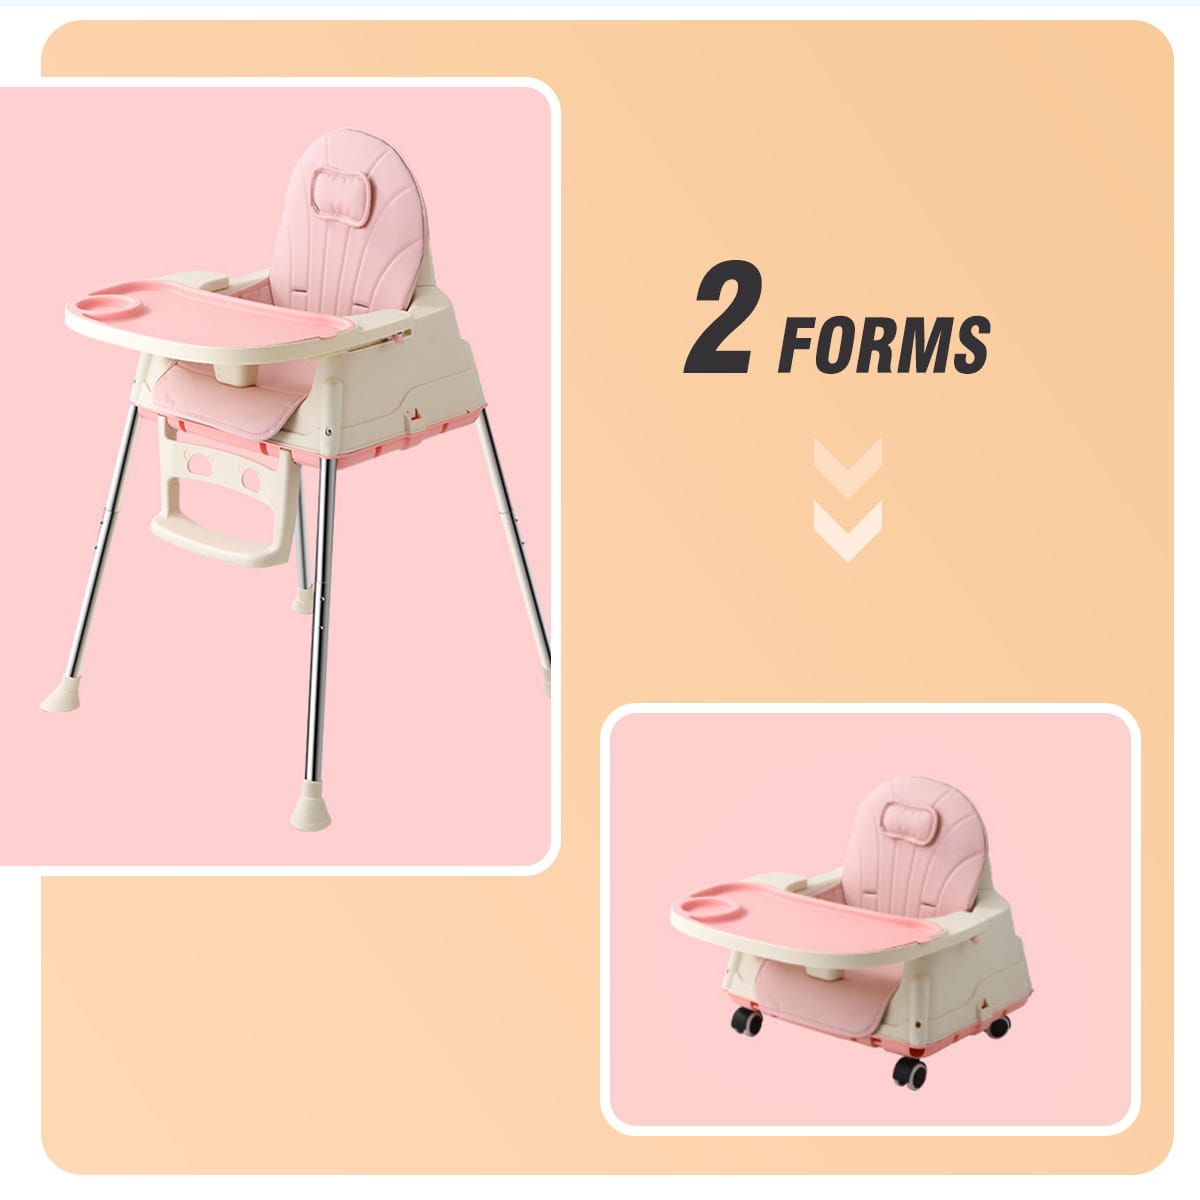 Children’s Dining Chair Baby Eating Table Bb Plastic